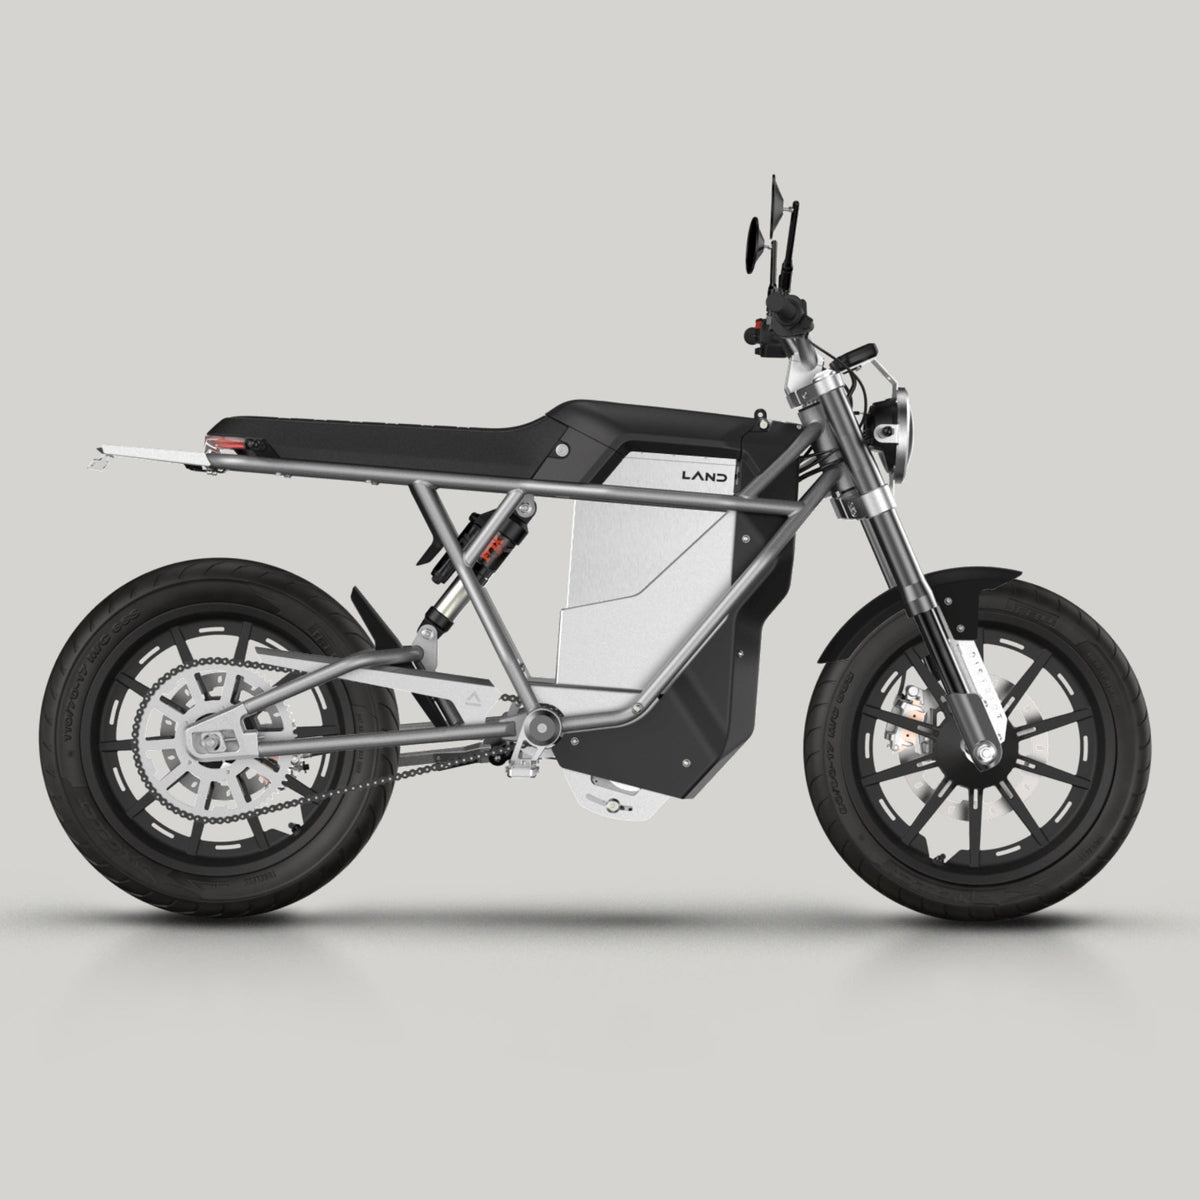 District Street Electric Motorcycle - Land Energy